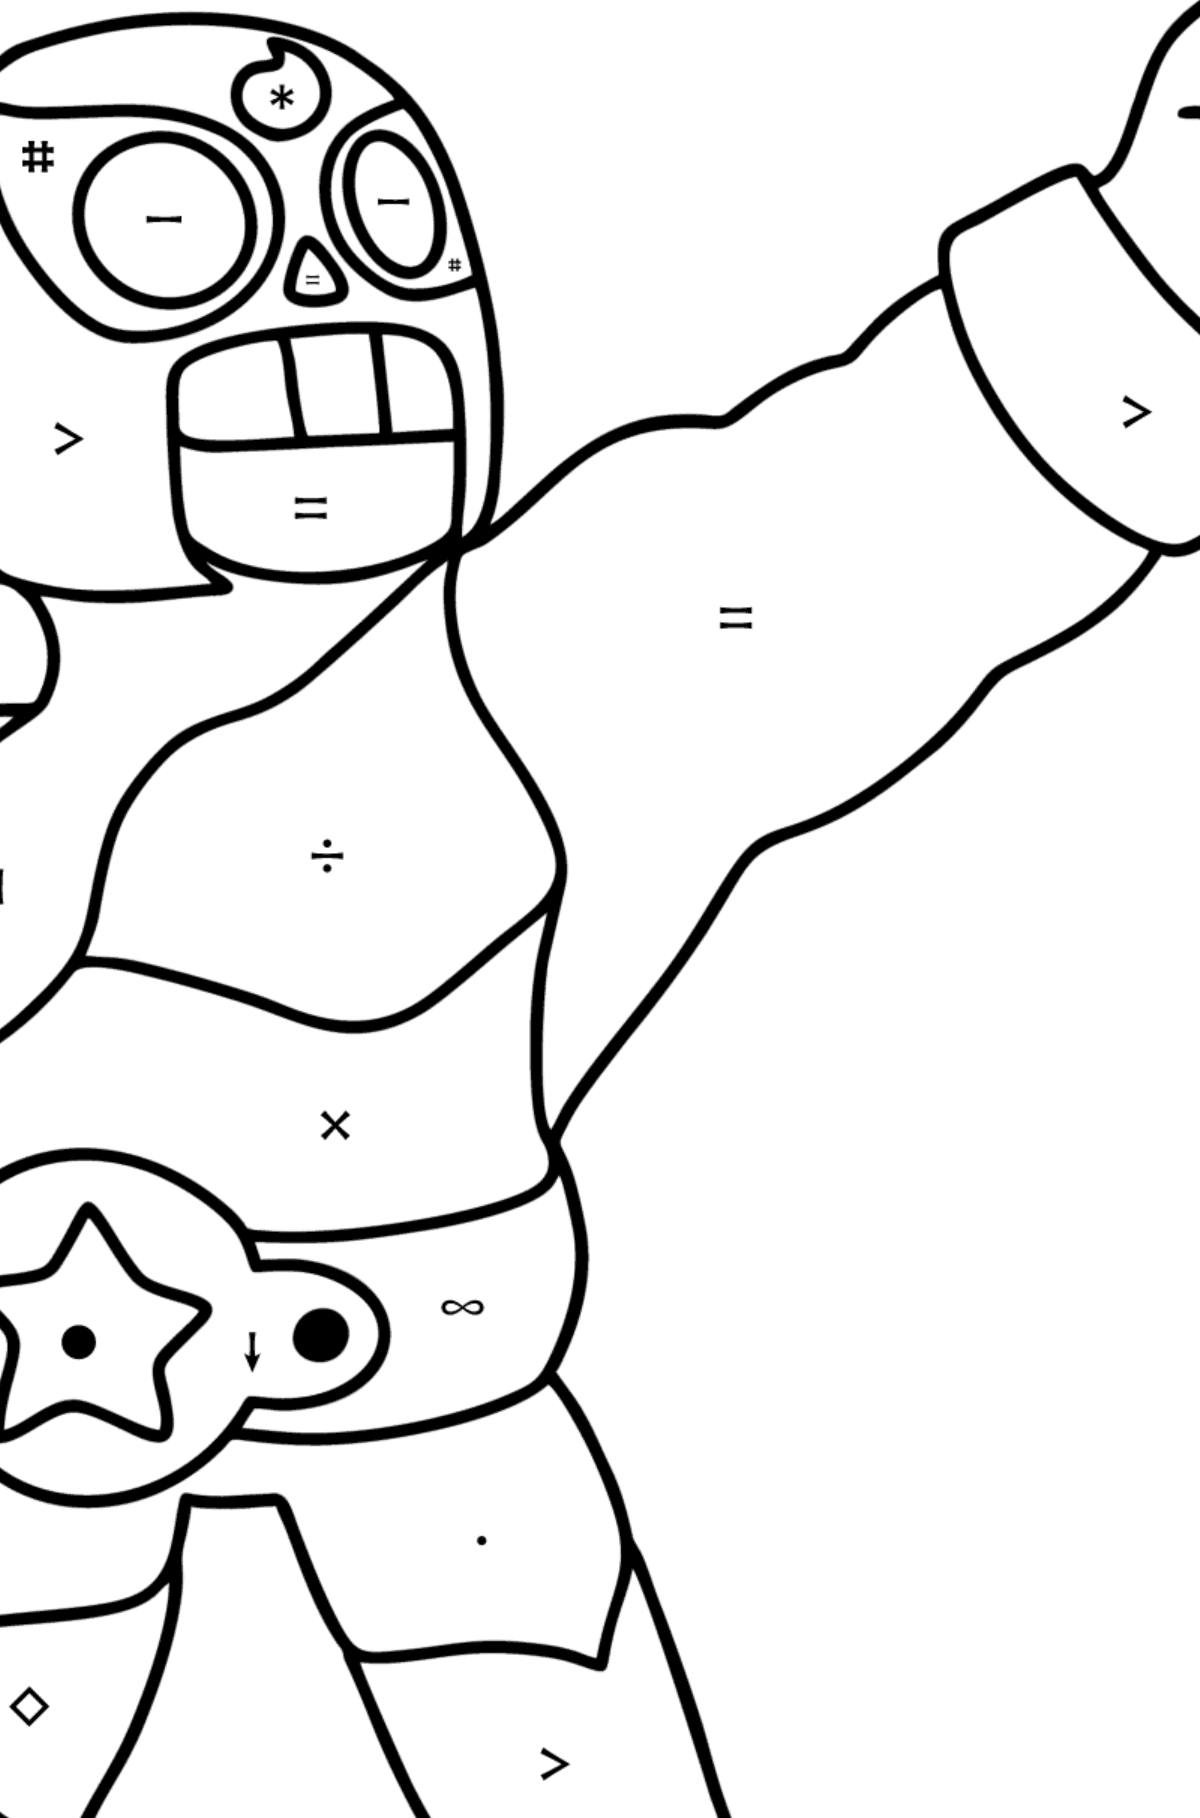 Brawl Stars El Primo coloring page - Coloring by Symbols for Kids